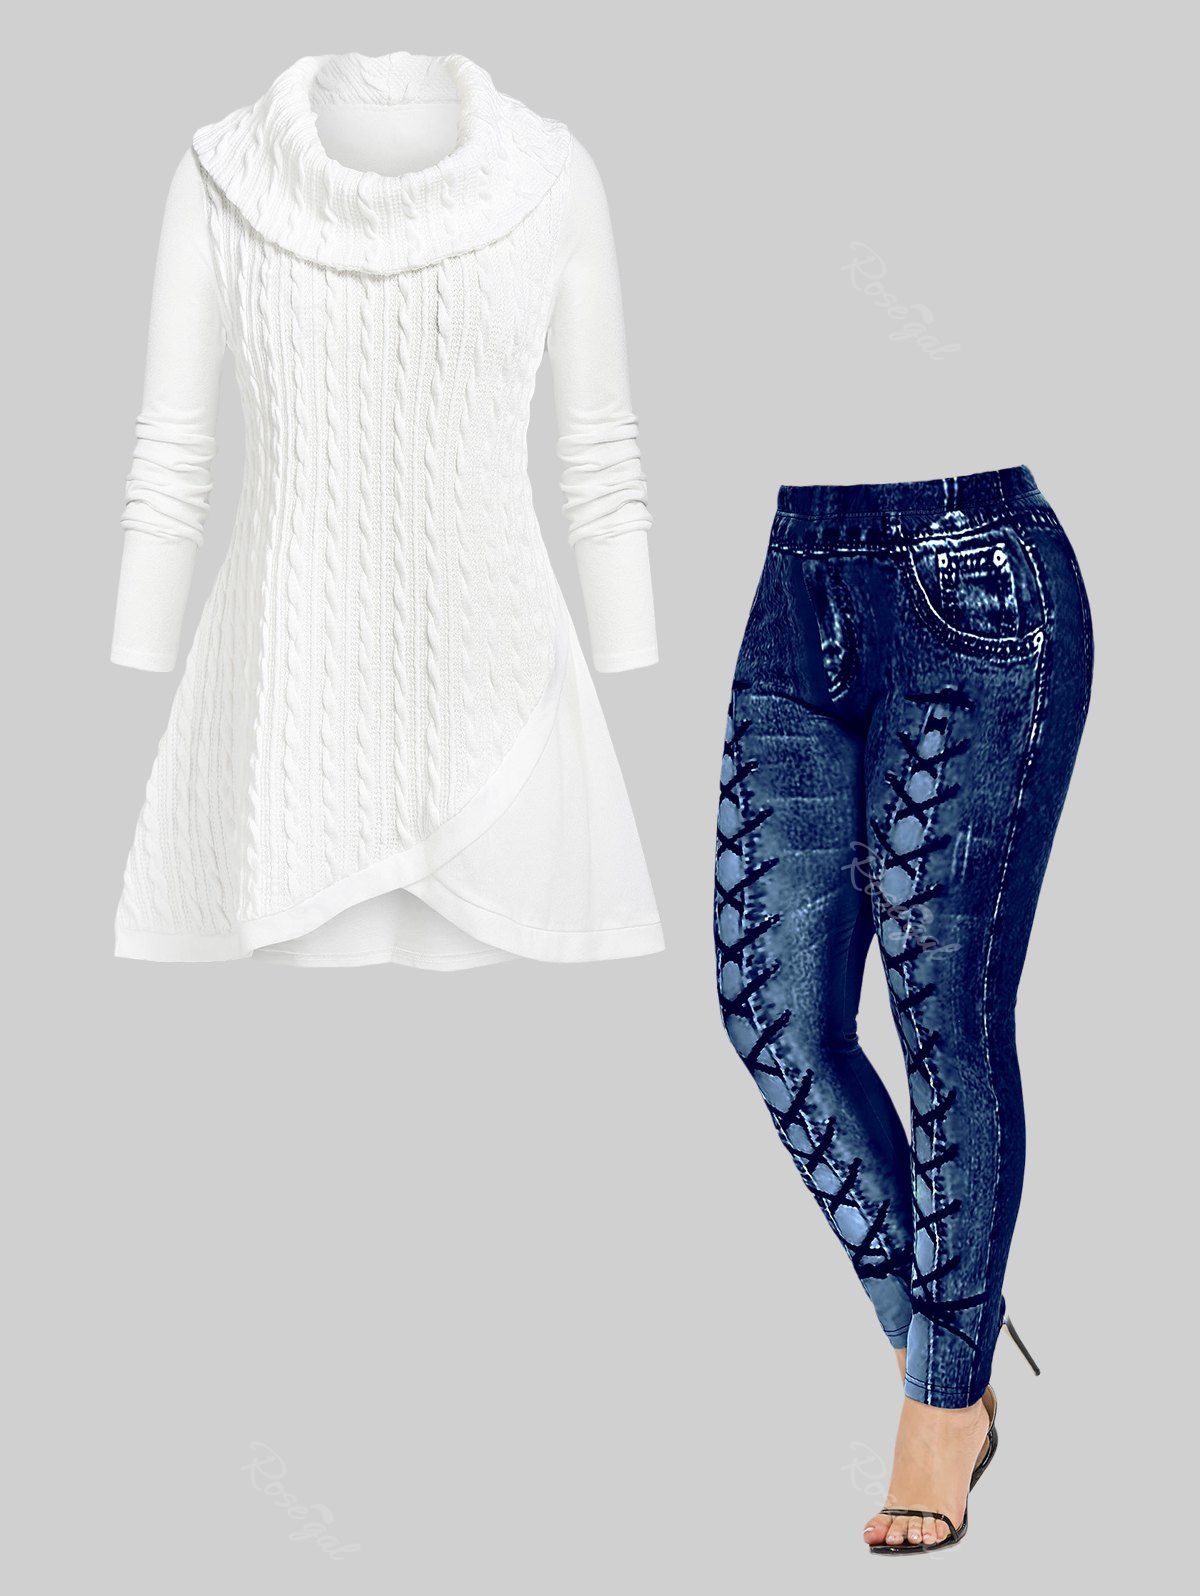 New Cable Knit Tulip Sweater and 3D Printed Leggings Plus Size Outfit  